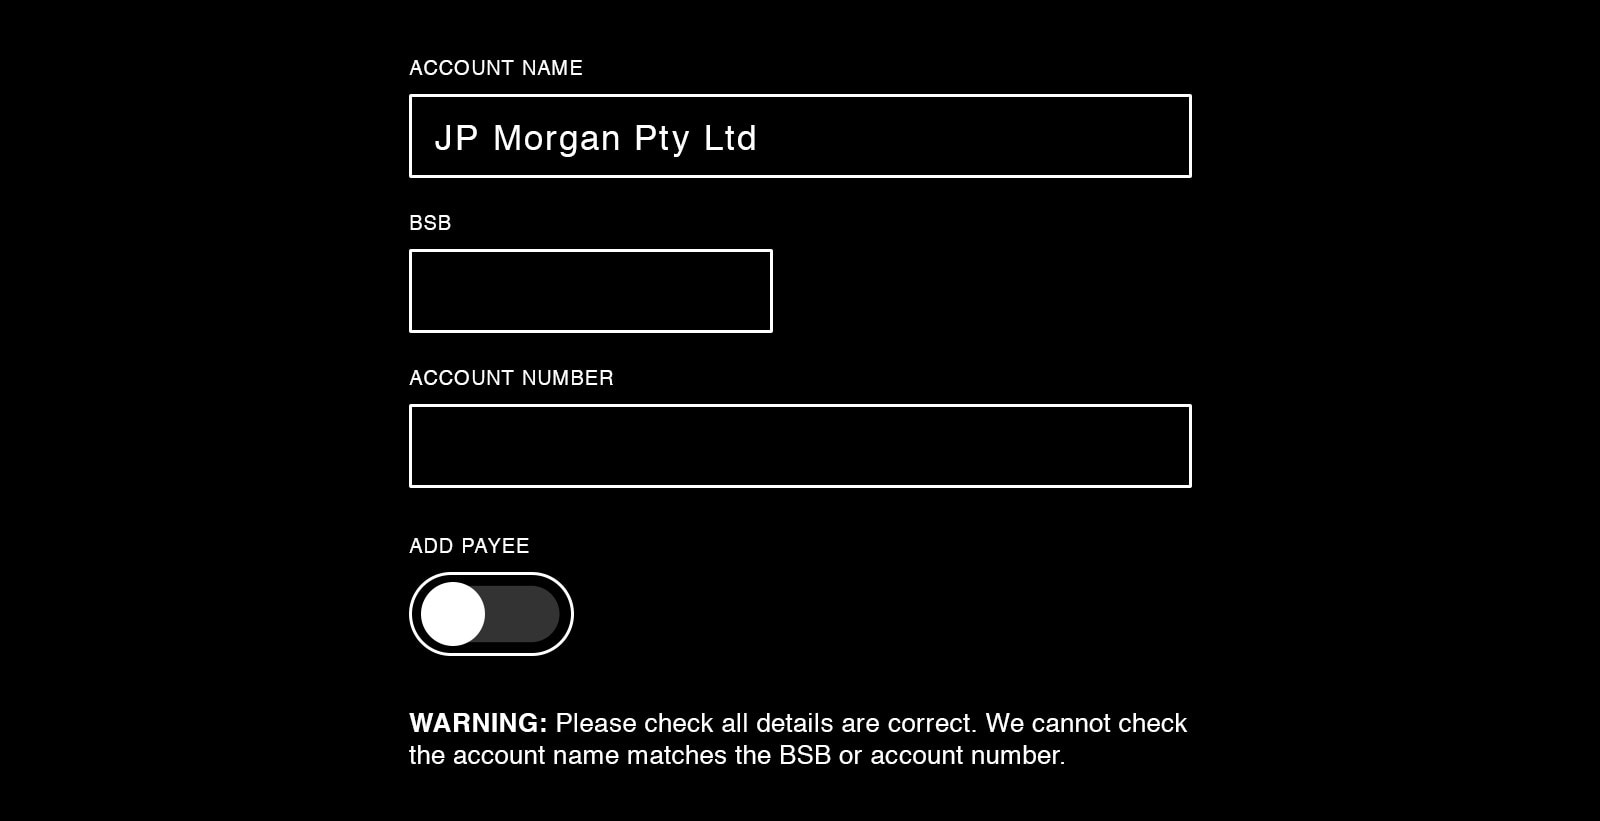 Website form for new payee including name, BSB and account number.